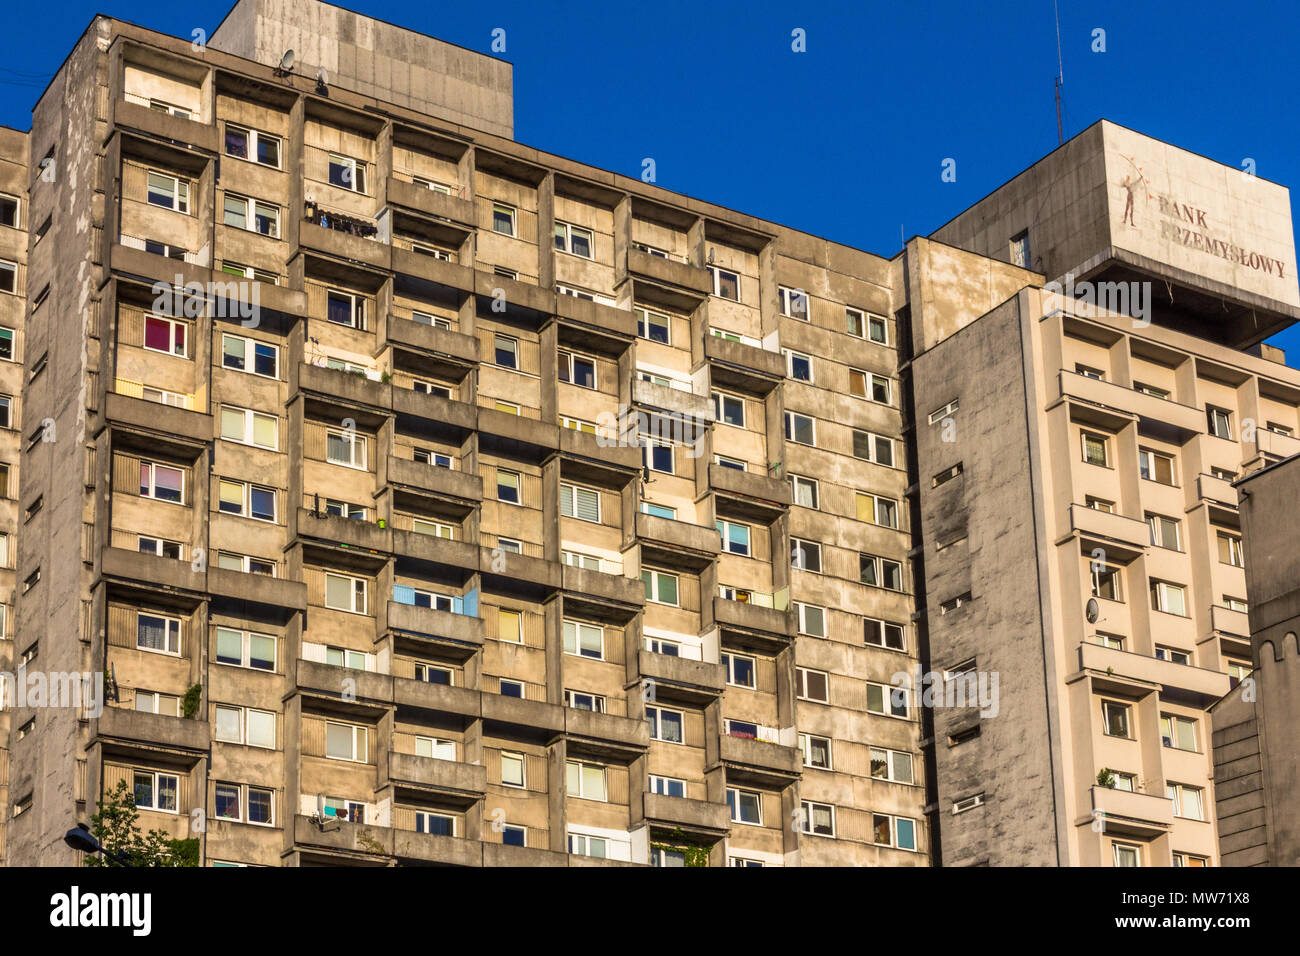 Block of high-rise residential buildings seen from Piotrkowska Street,  Lodz, Poland, against a blue sky Stock Photo - Alamy